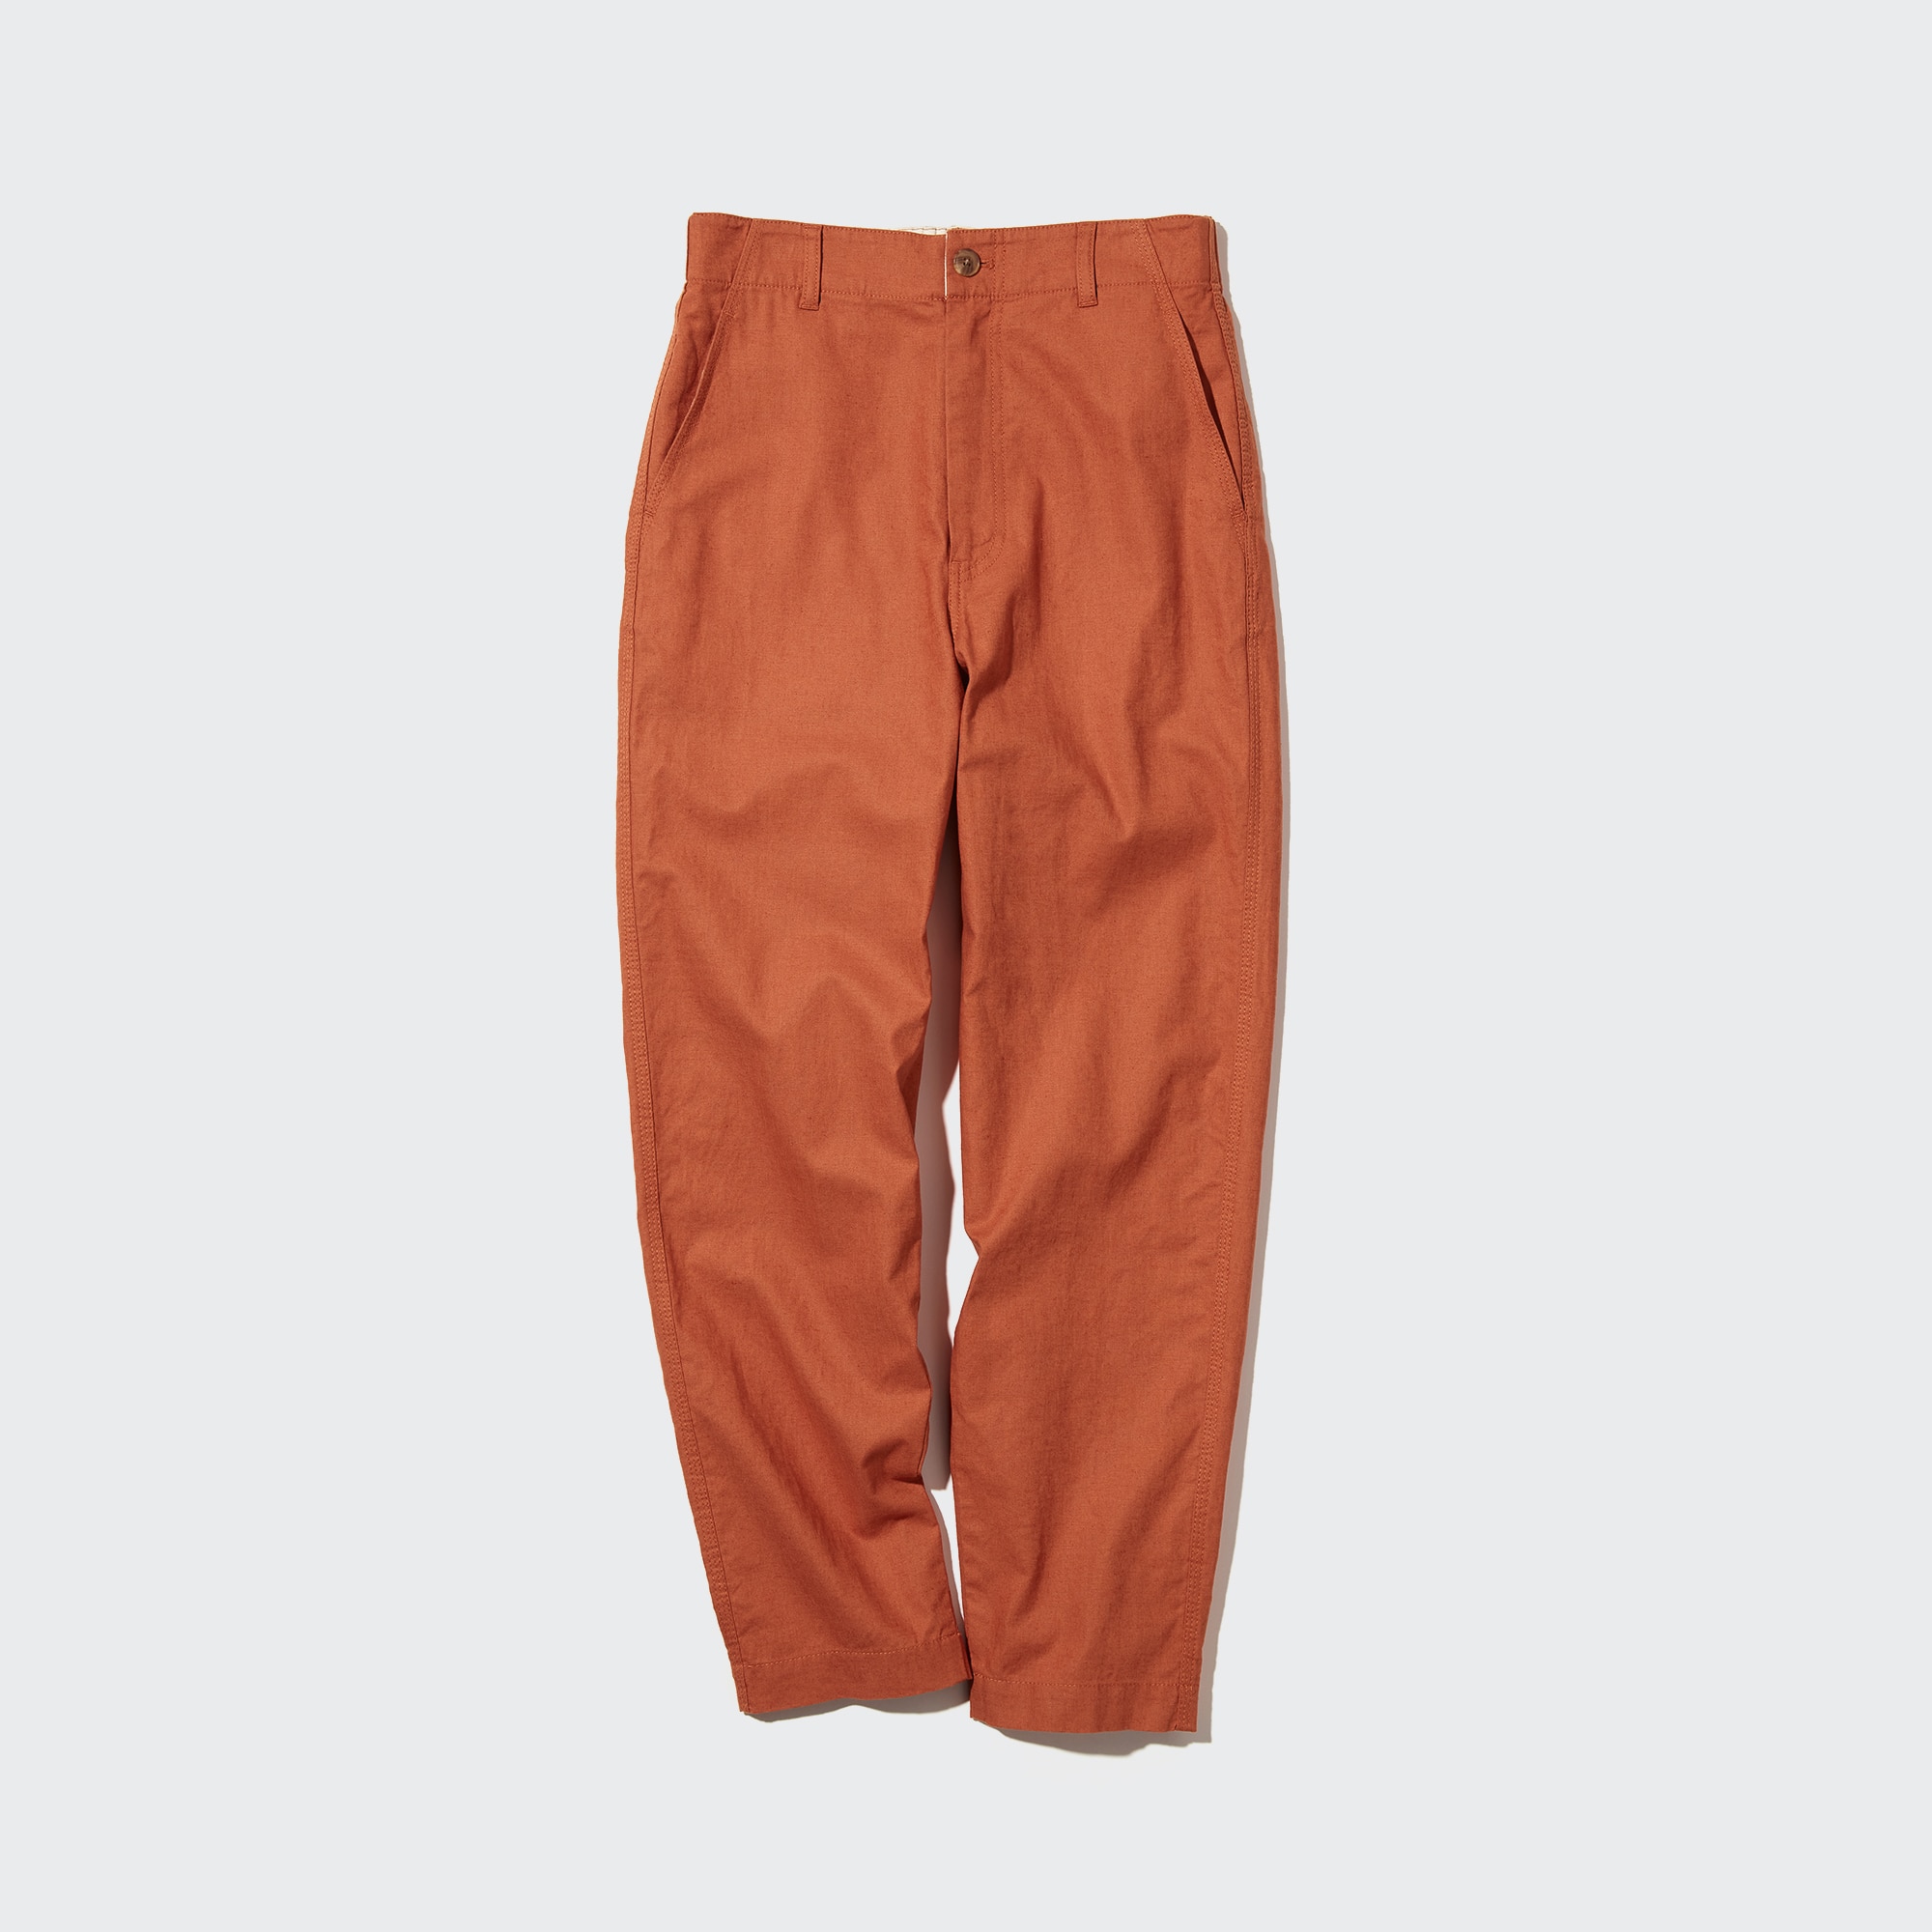 Cotton-blend tapered pants